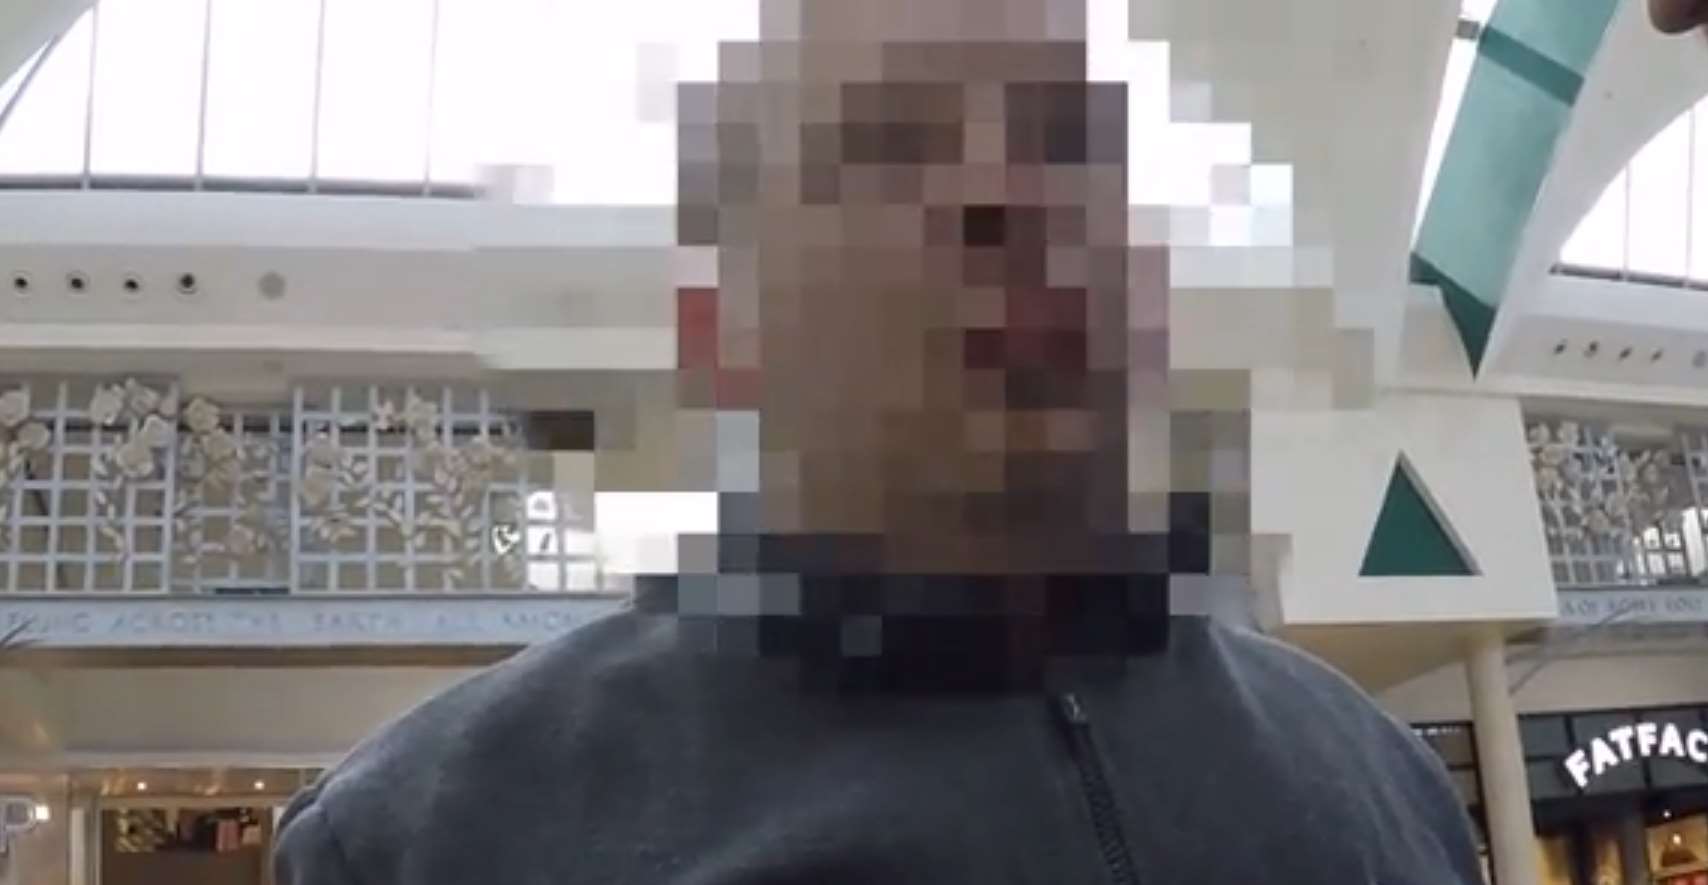 A man was confronted by so-called paedophile hunters at Bluewater last May